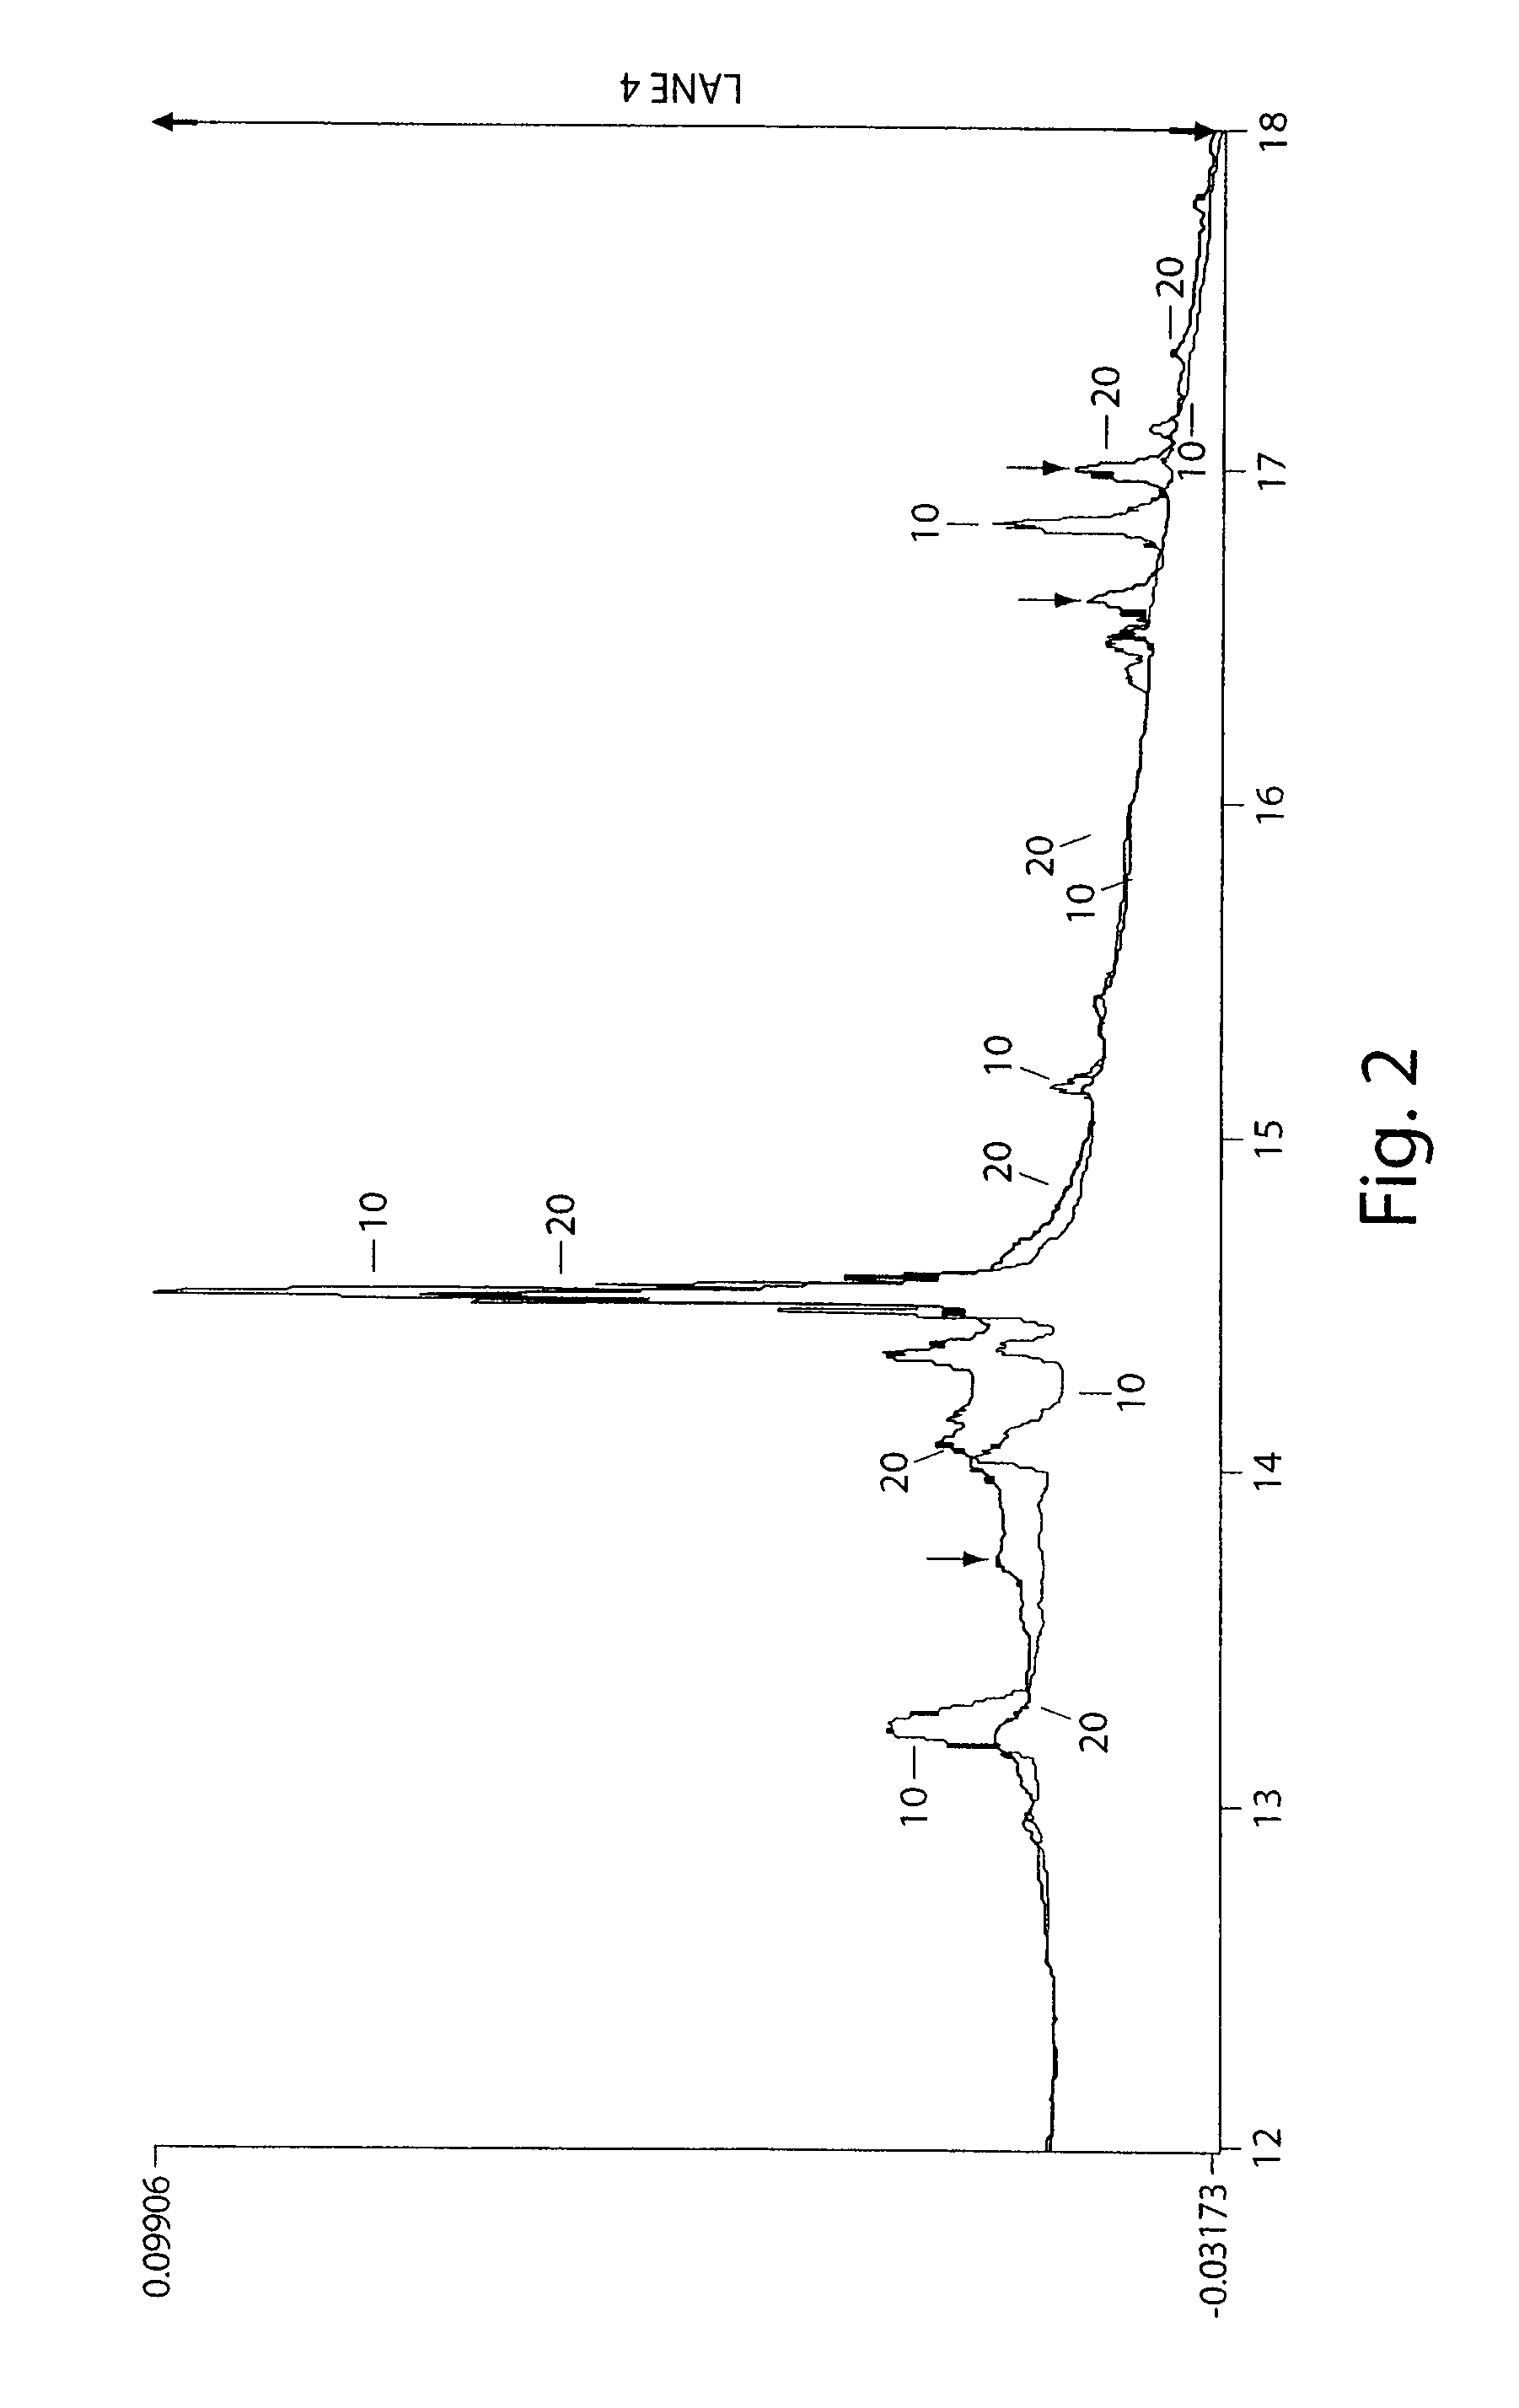 Systems and methods for characterization of molecules